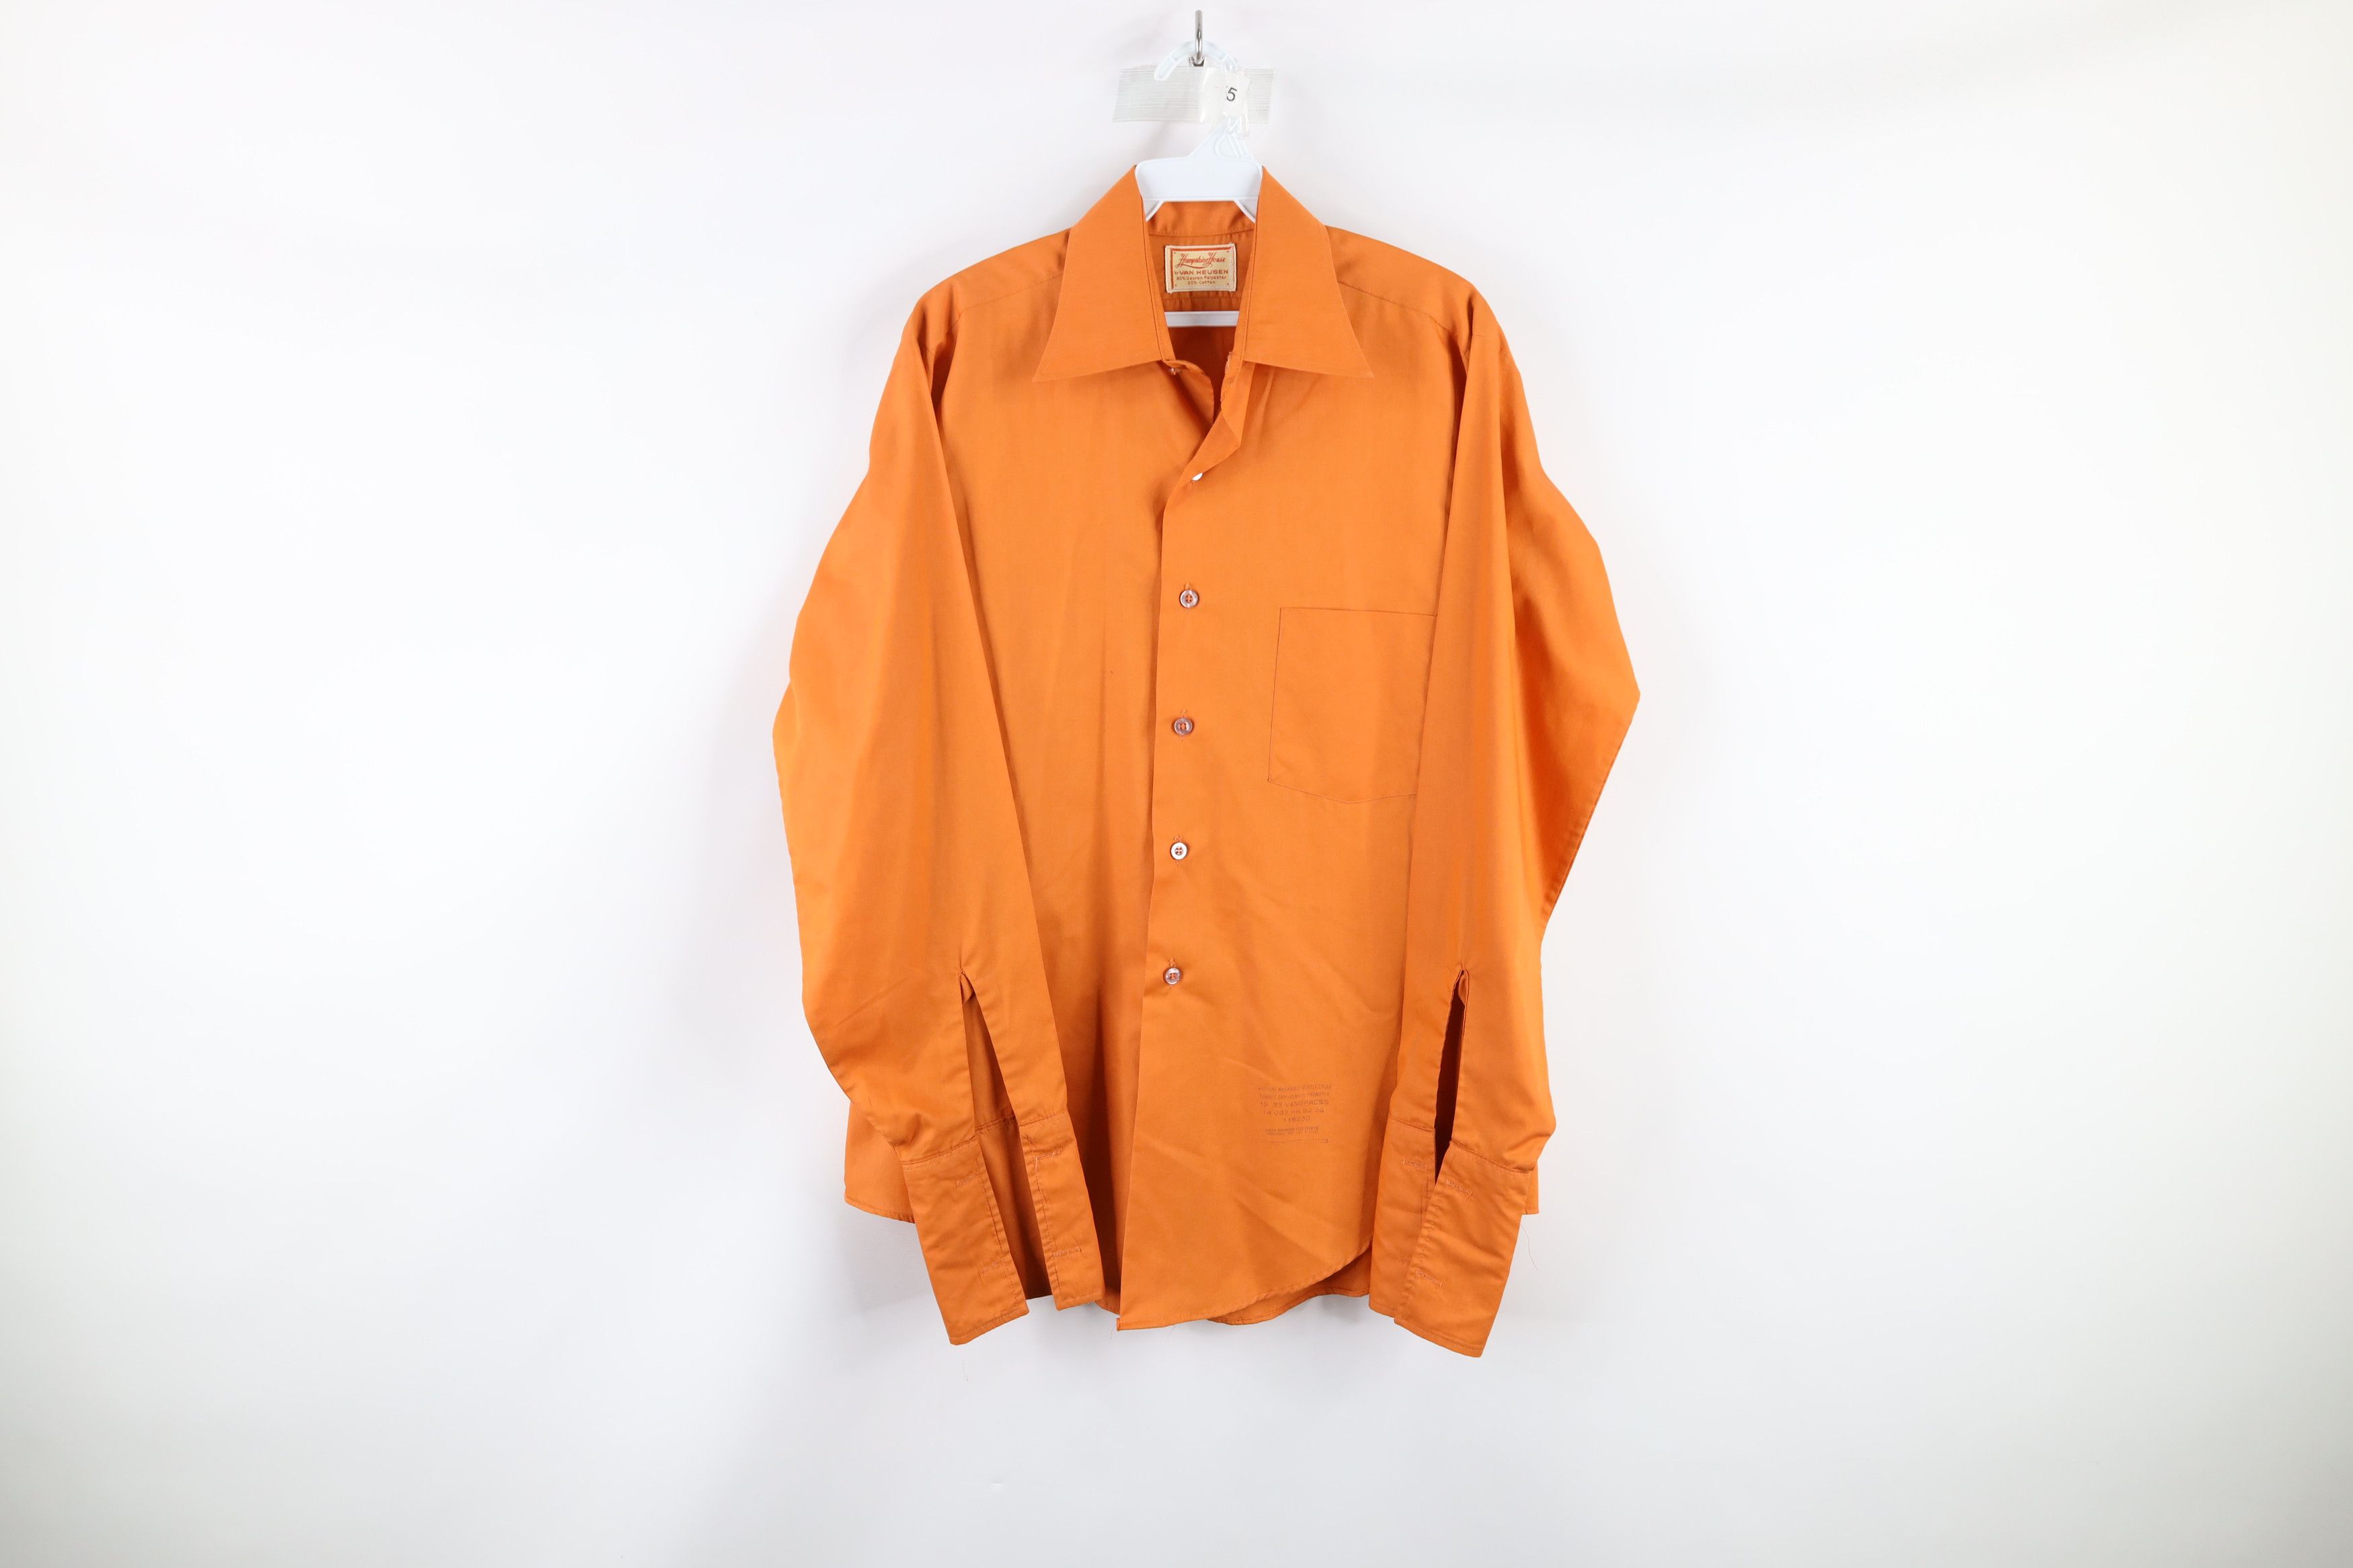 Vintage Vintage 70s French Cuff Collared Long Sleeve Button Shirt Size US M / EU 48-50 / 2 - 1 Preview